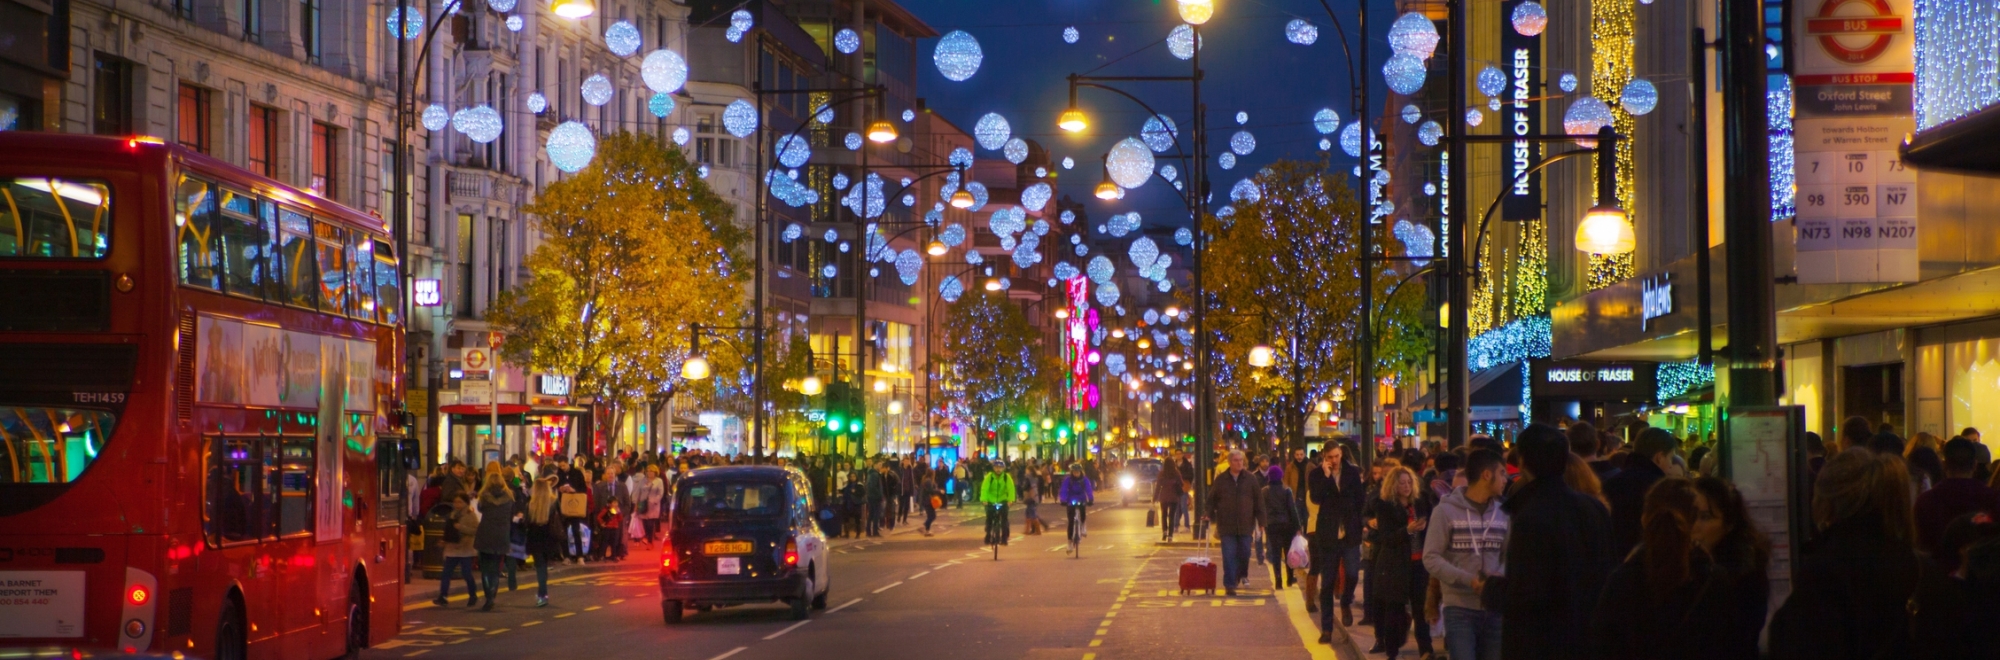 Is out-of-home advertising the answer to eye-catching festive campaigns this Christmas?